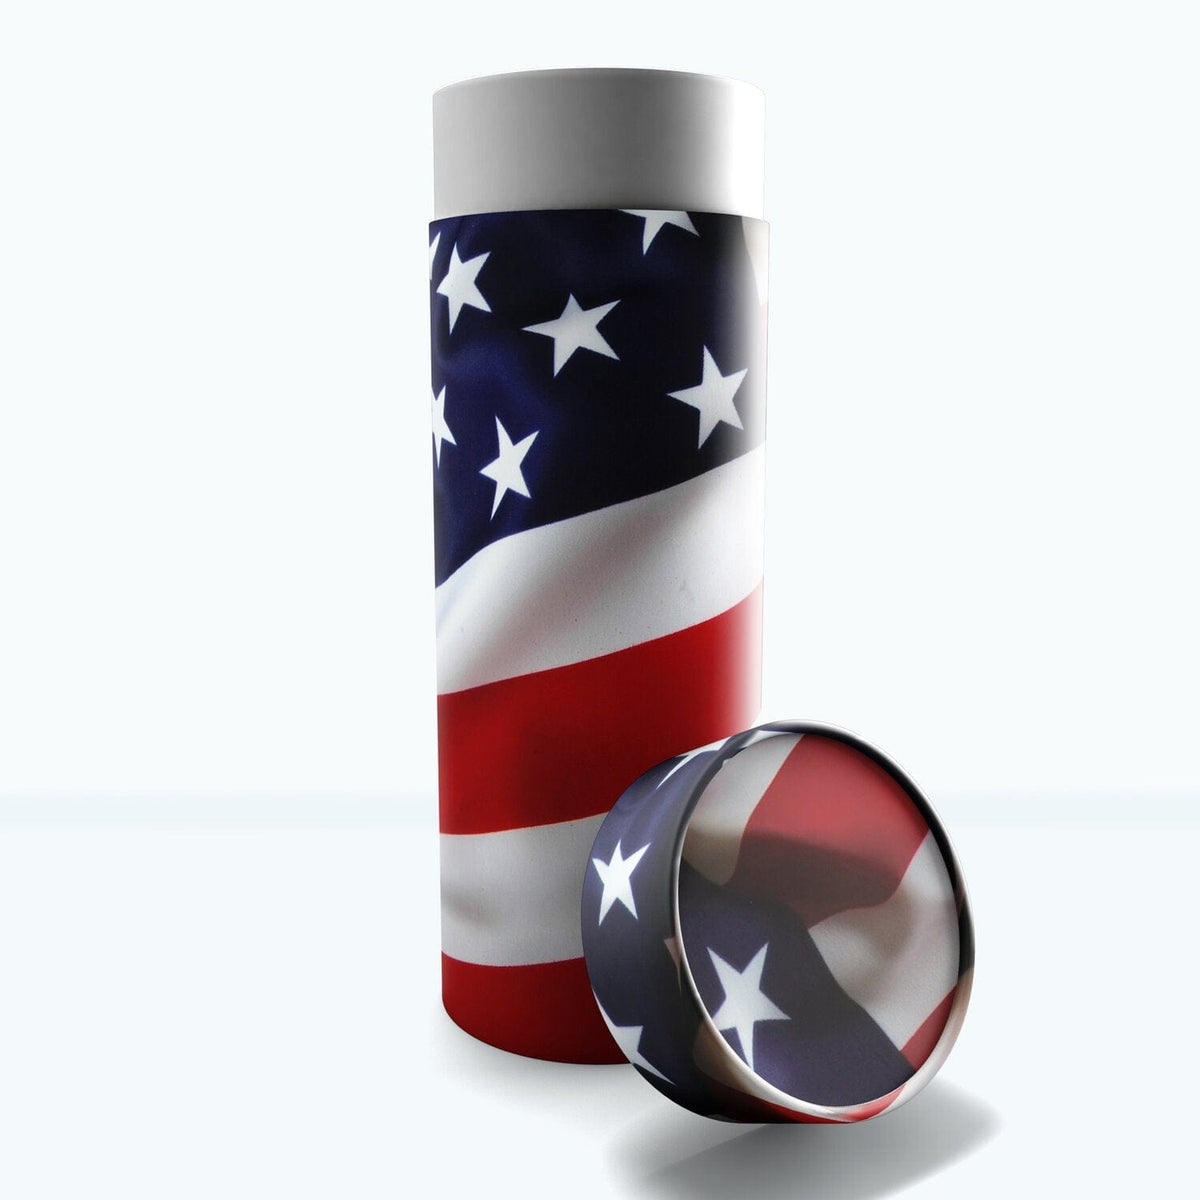 Commemorative Cremation Urns LARGE  12 x 5 - Holds up to 230 cubic inches American Flag - Biodegradable &amp; Eco Friendly Burial or Scattering Urn / Tube